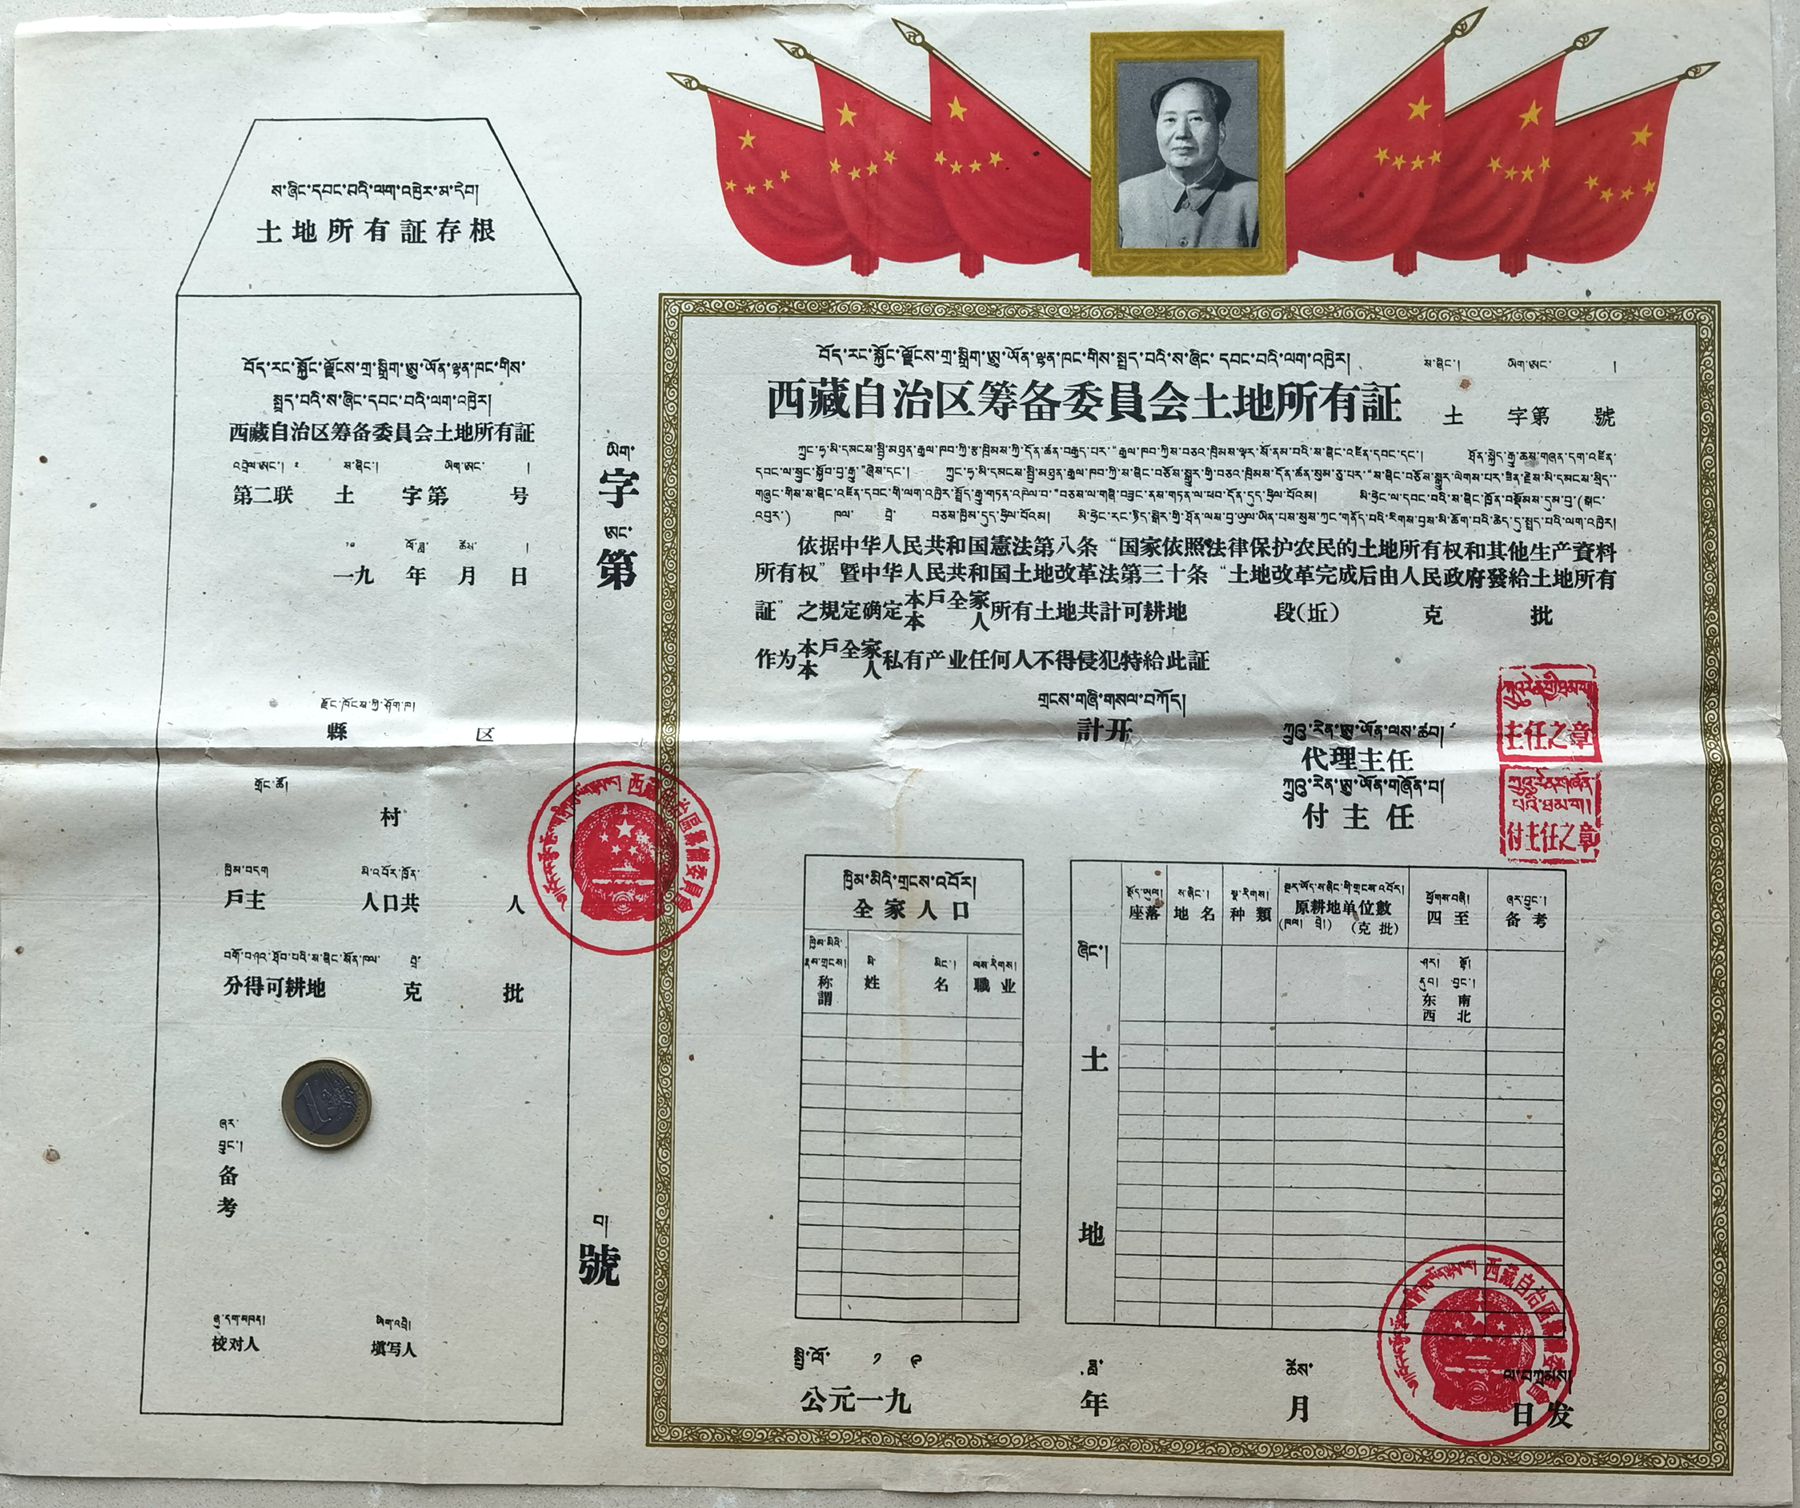 XZ830, Rare Tibet Land Deed, 1960's with Chairman Mao and Red Flag